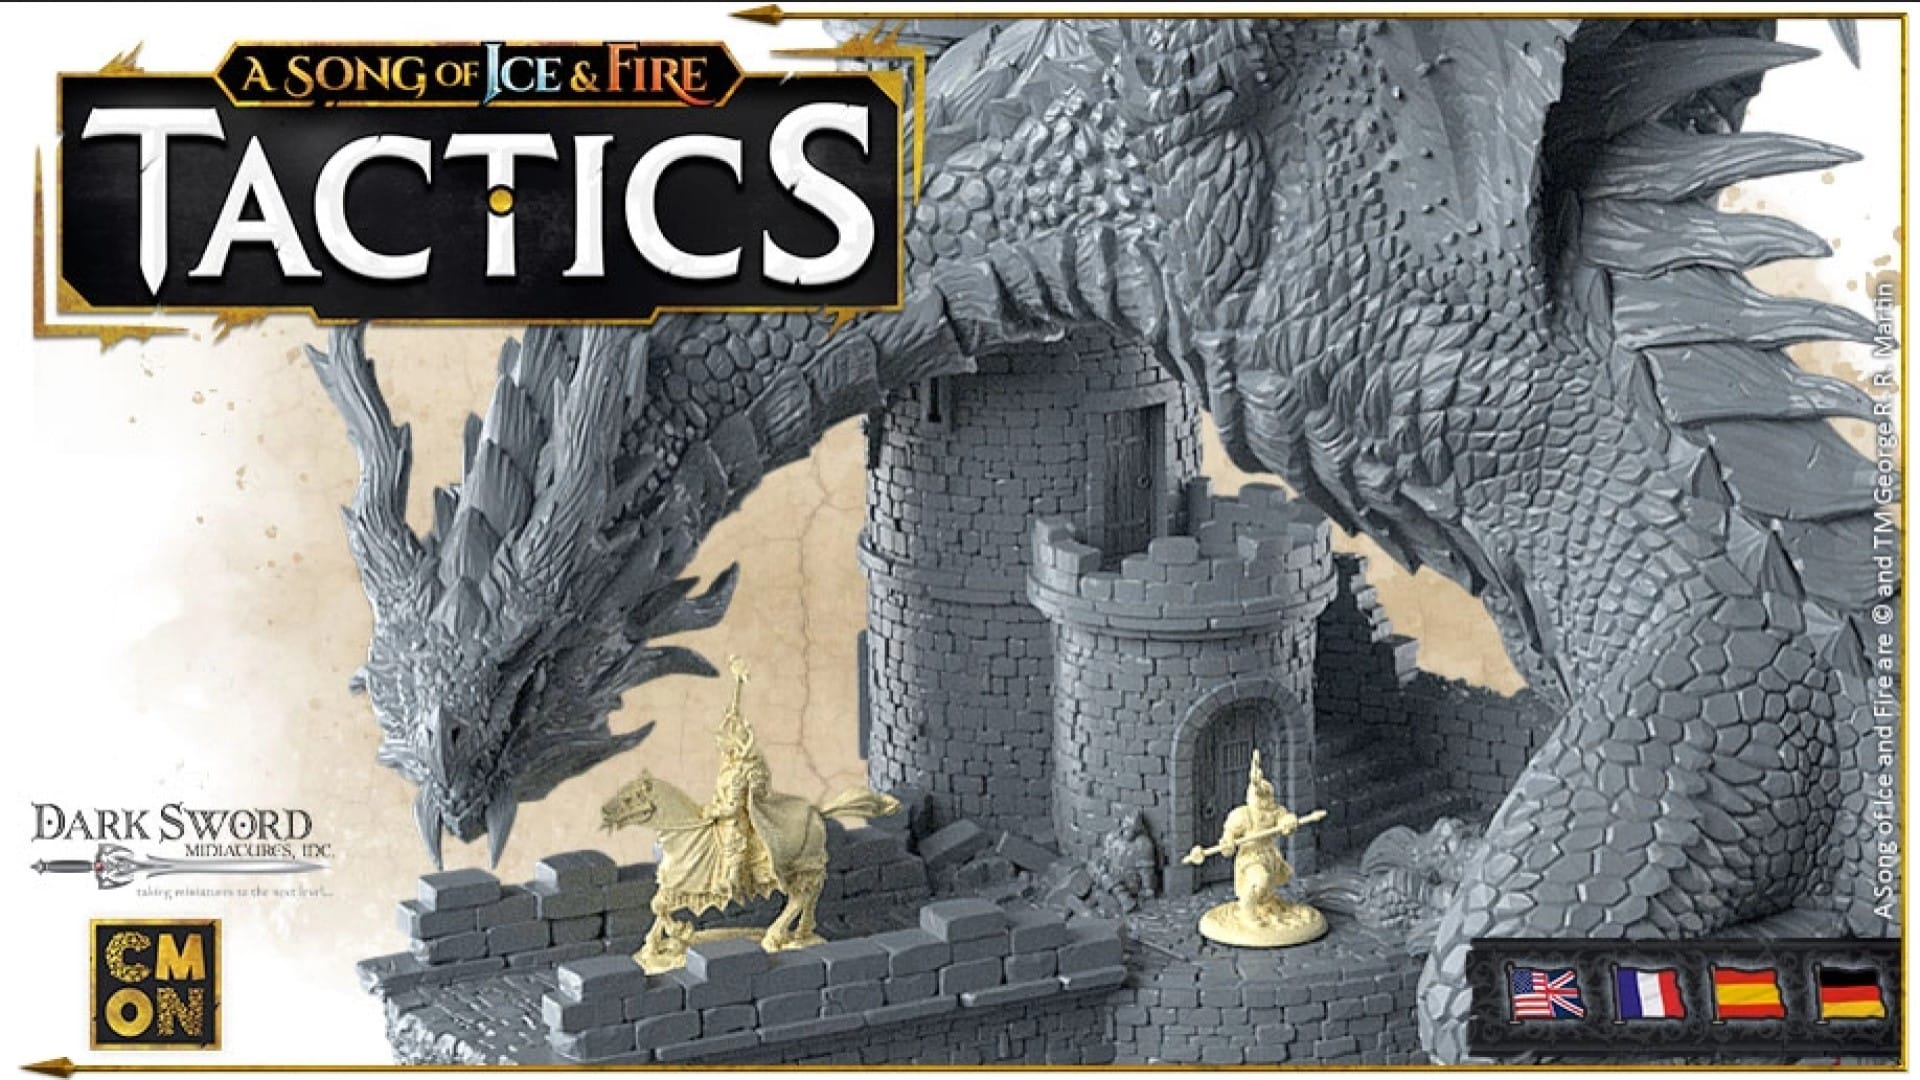 A Song of Ice & Fire: Tactics Fully Funded In Under 7 Hours